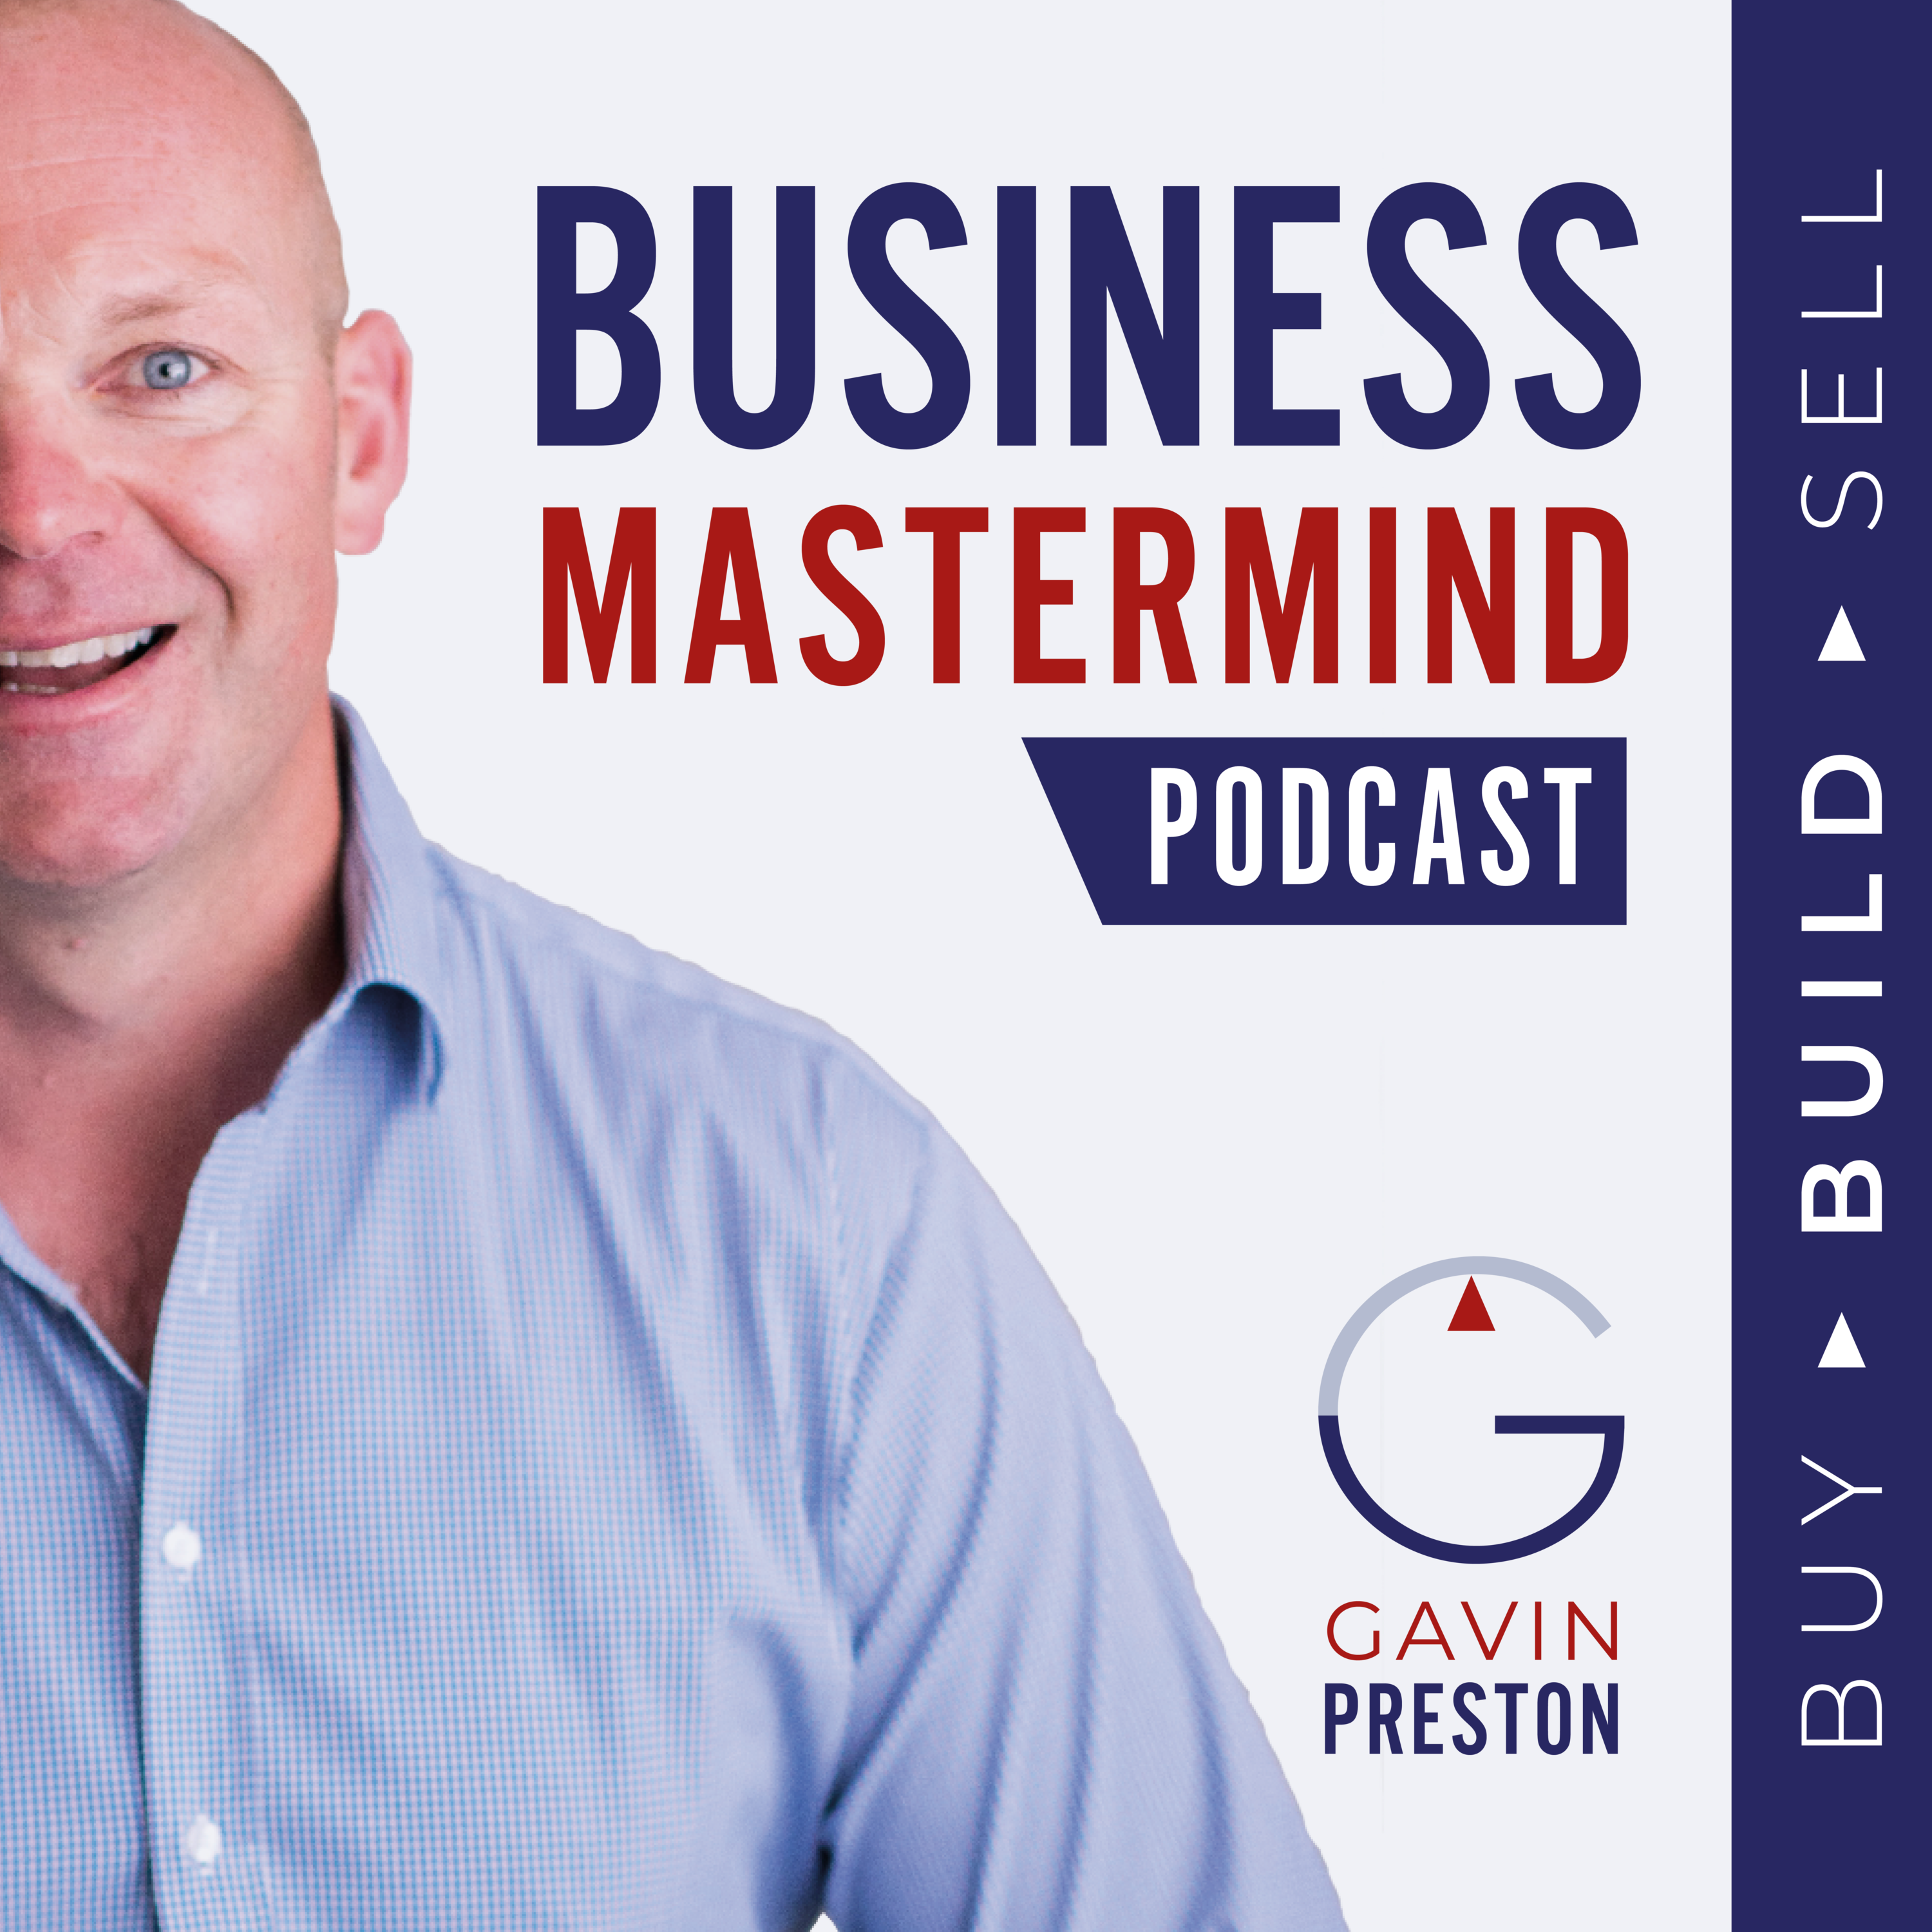 How to grow Digital, Business & Personal Resilience; With Jason Dunlop